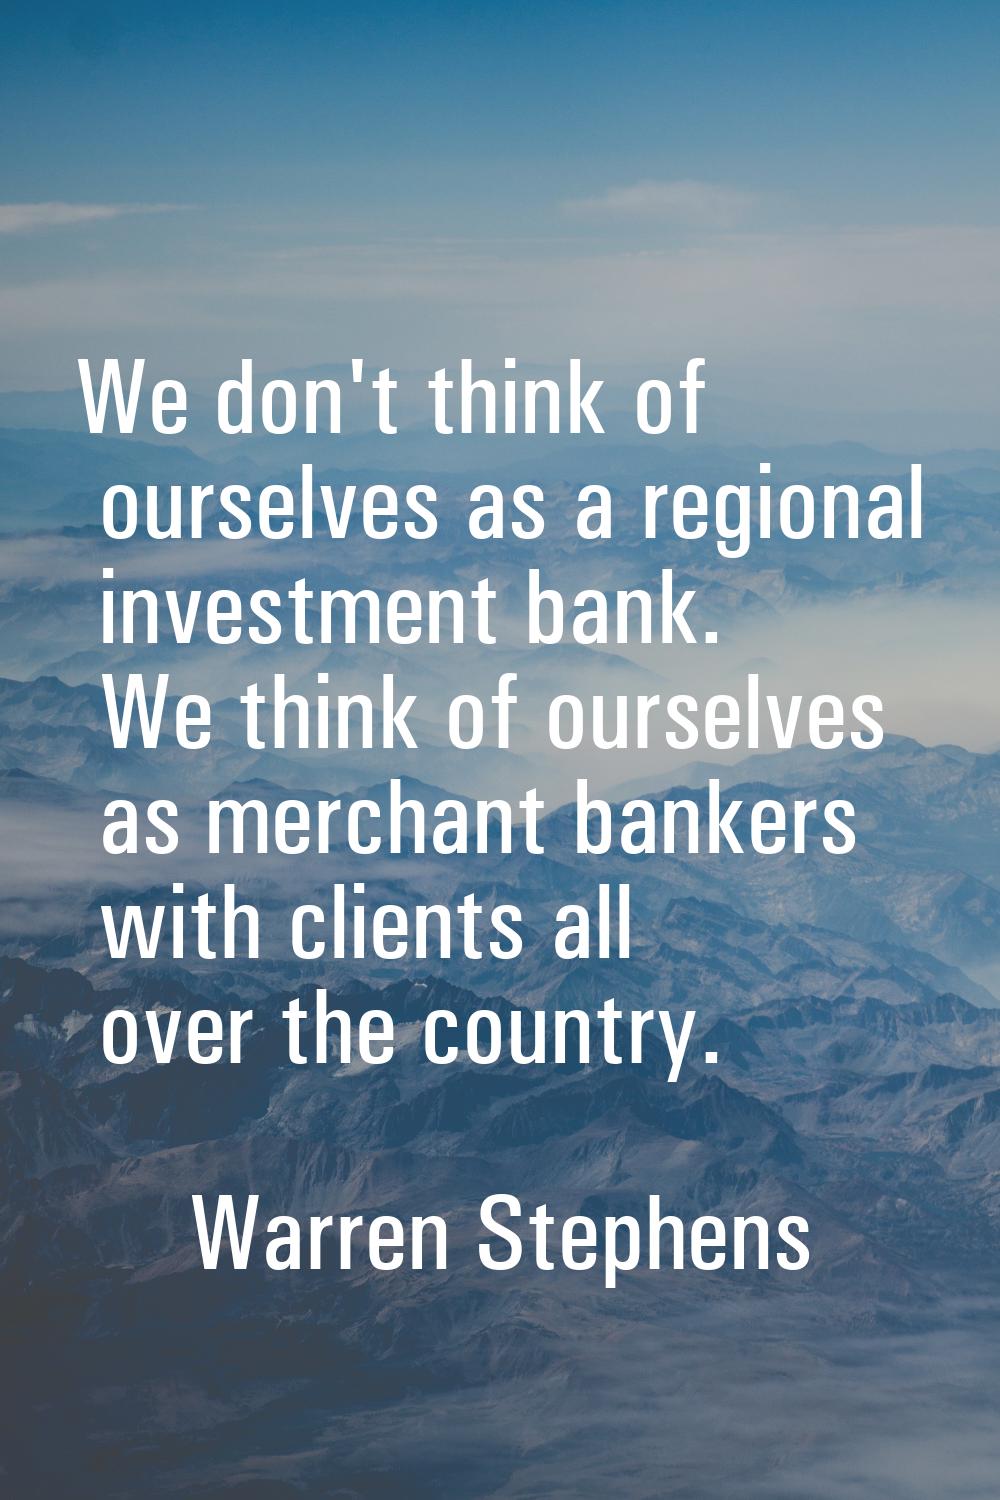 We don't think of ourselves as a regional investment bank. We think of ourselves as merchant banker